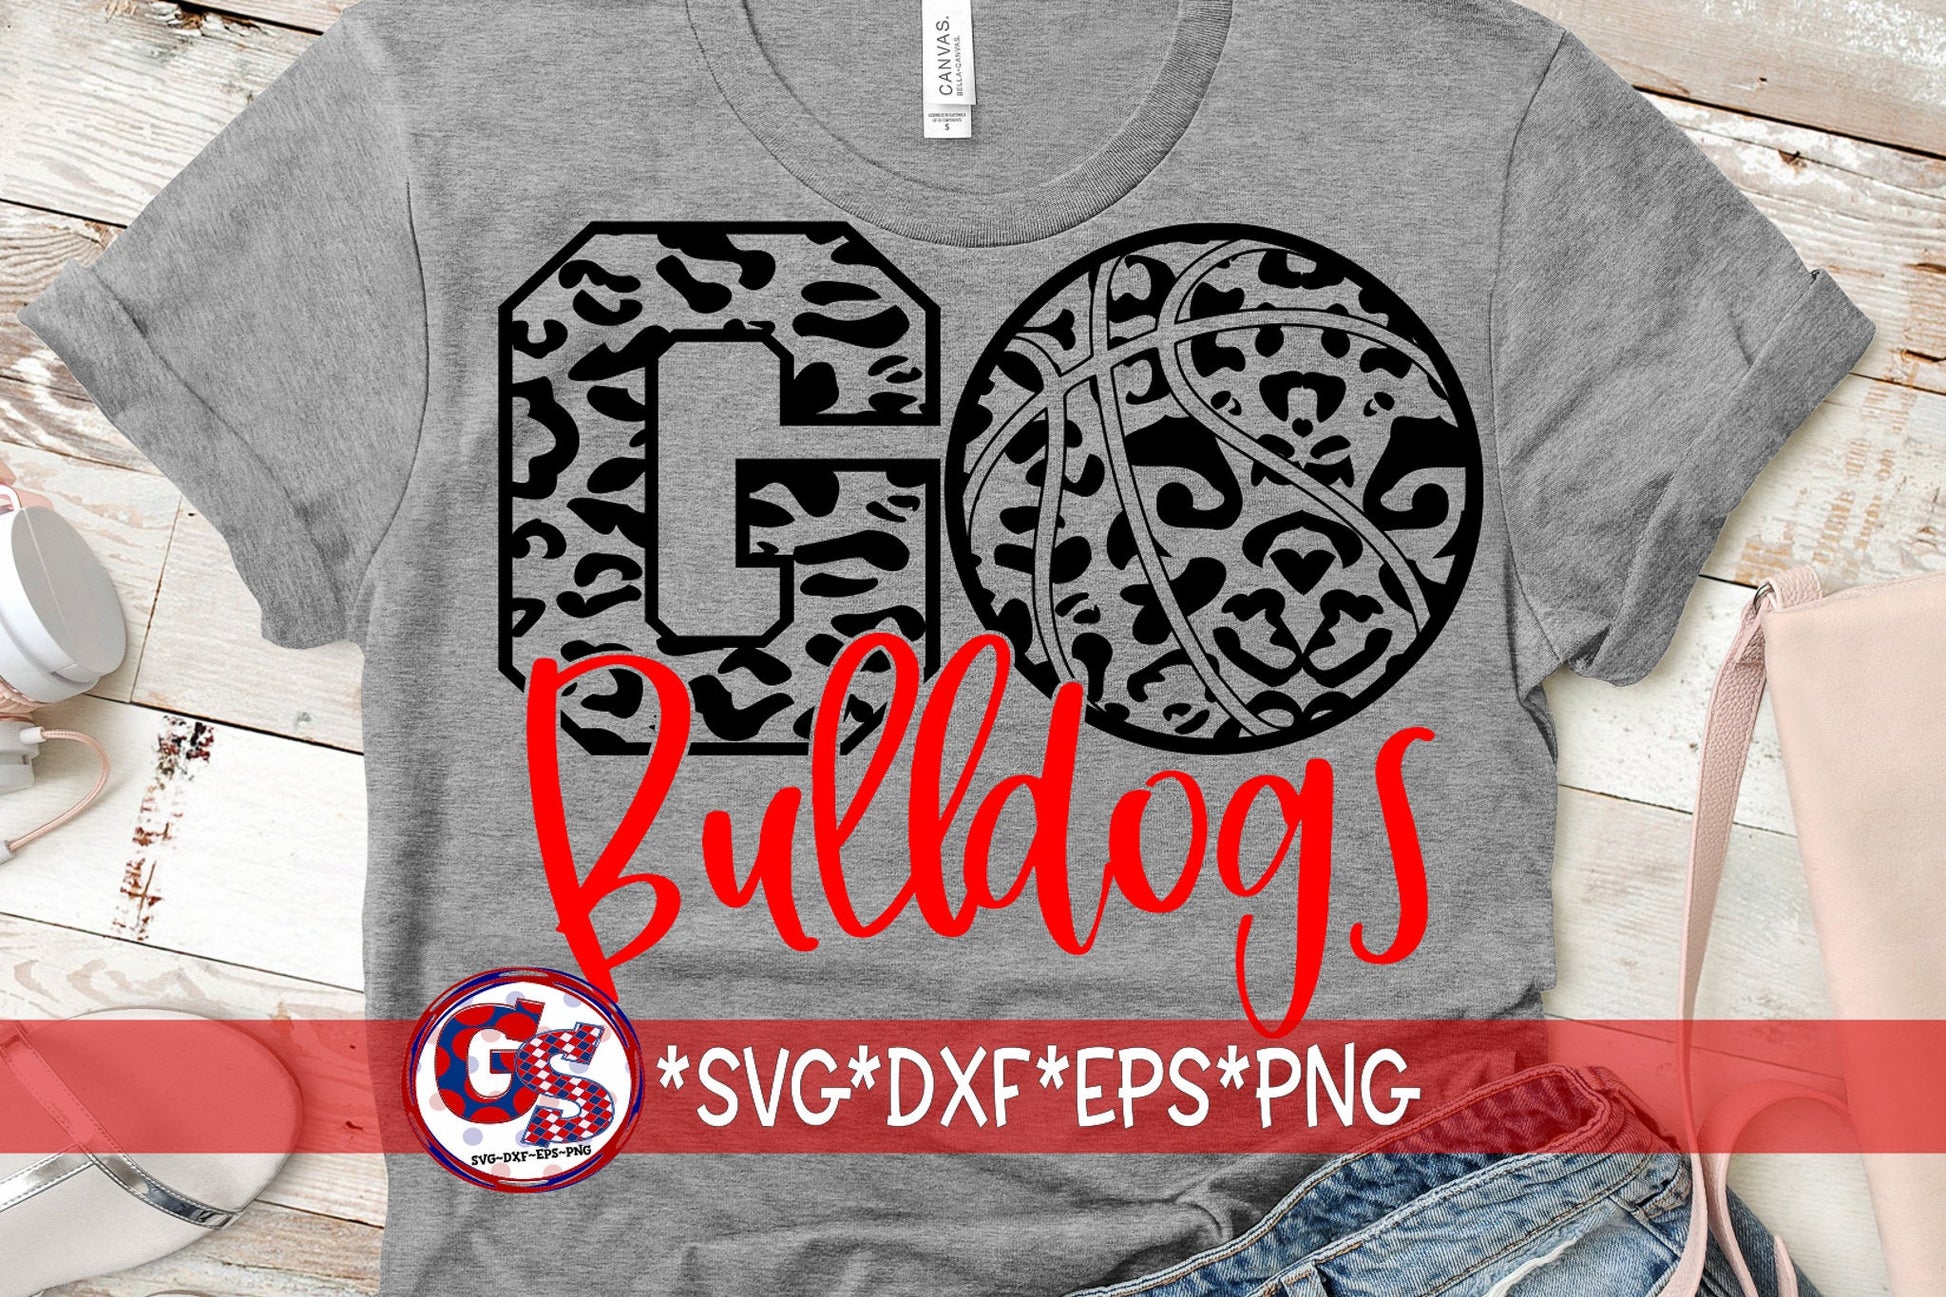 Go Bulldogs Basketball SvG | Bulldogs svg dxf eps png. Go Bulldogs Basketball Leopard SvG | Bulldogs SvG | Instant Download Cut File